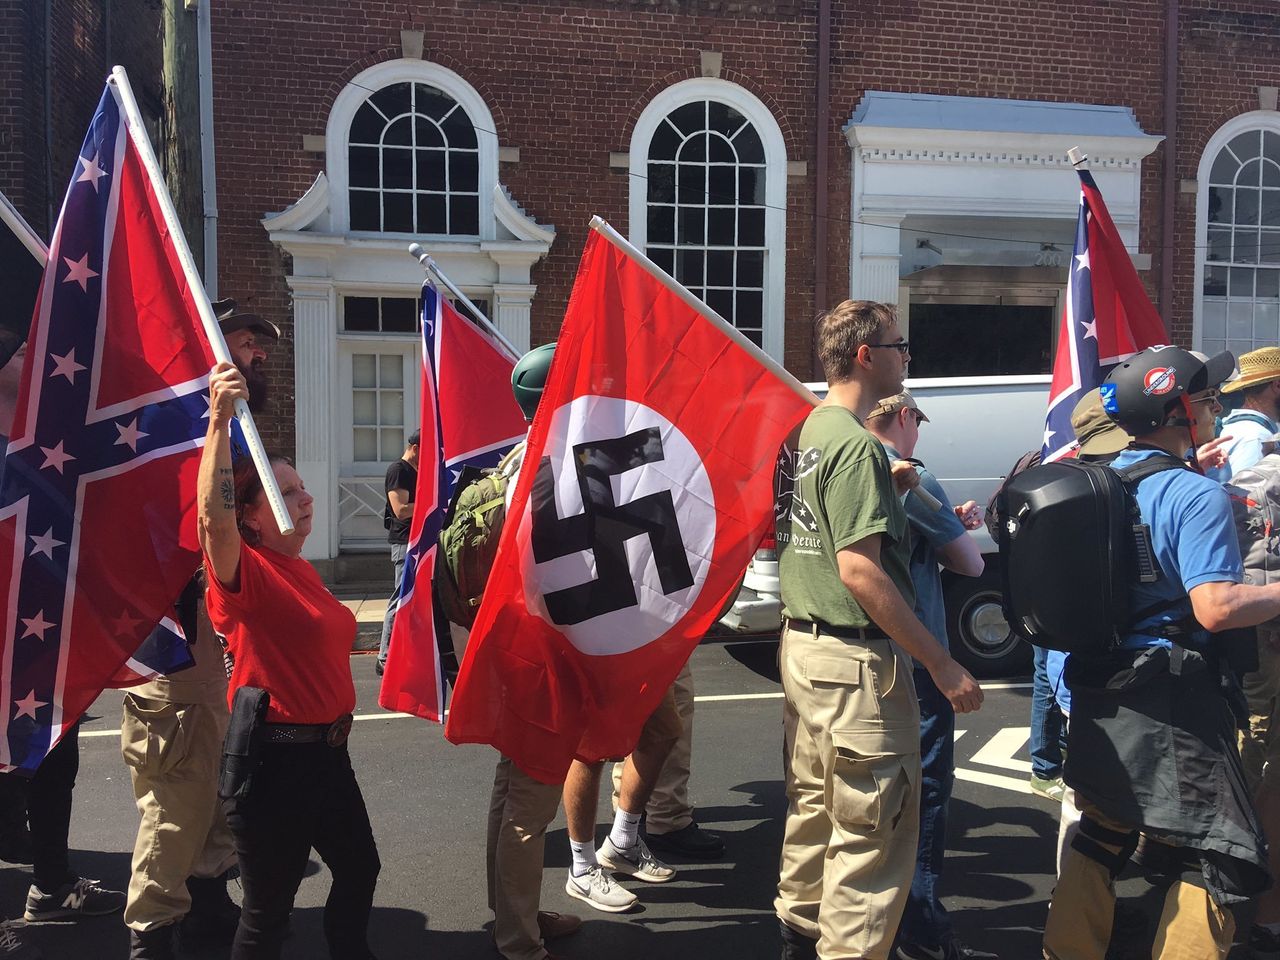 Marchers in Charlottesville, Virginia, carried Confederate and Nazi flags.